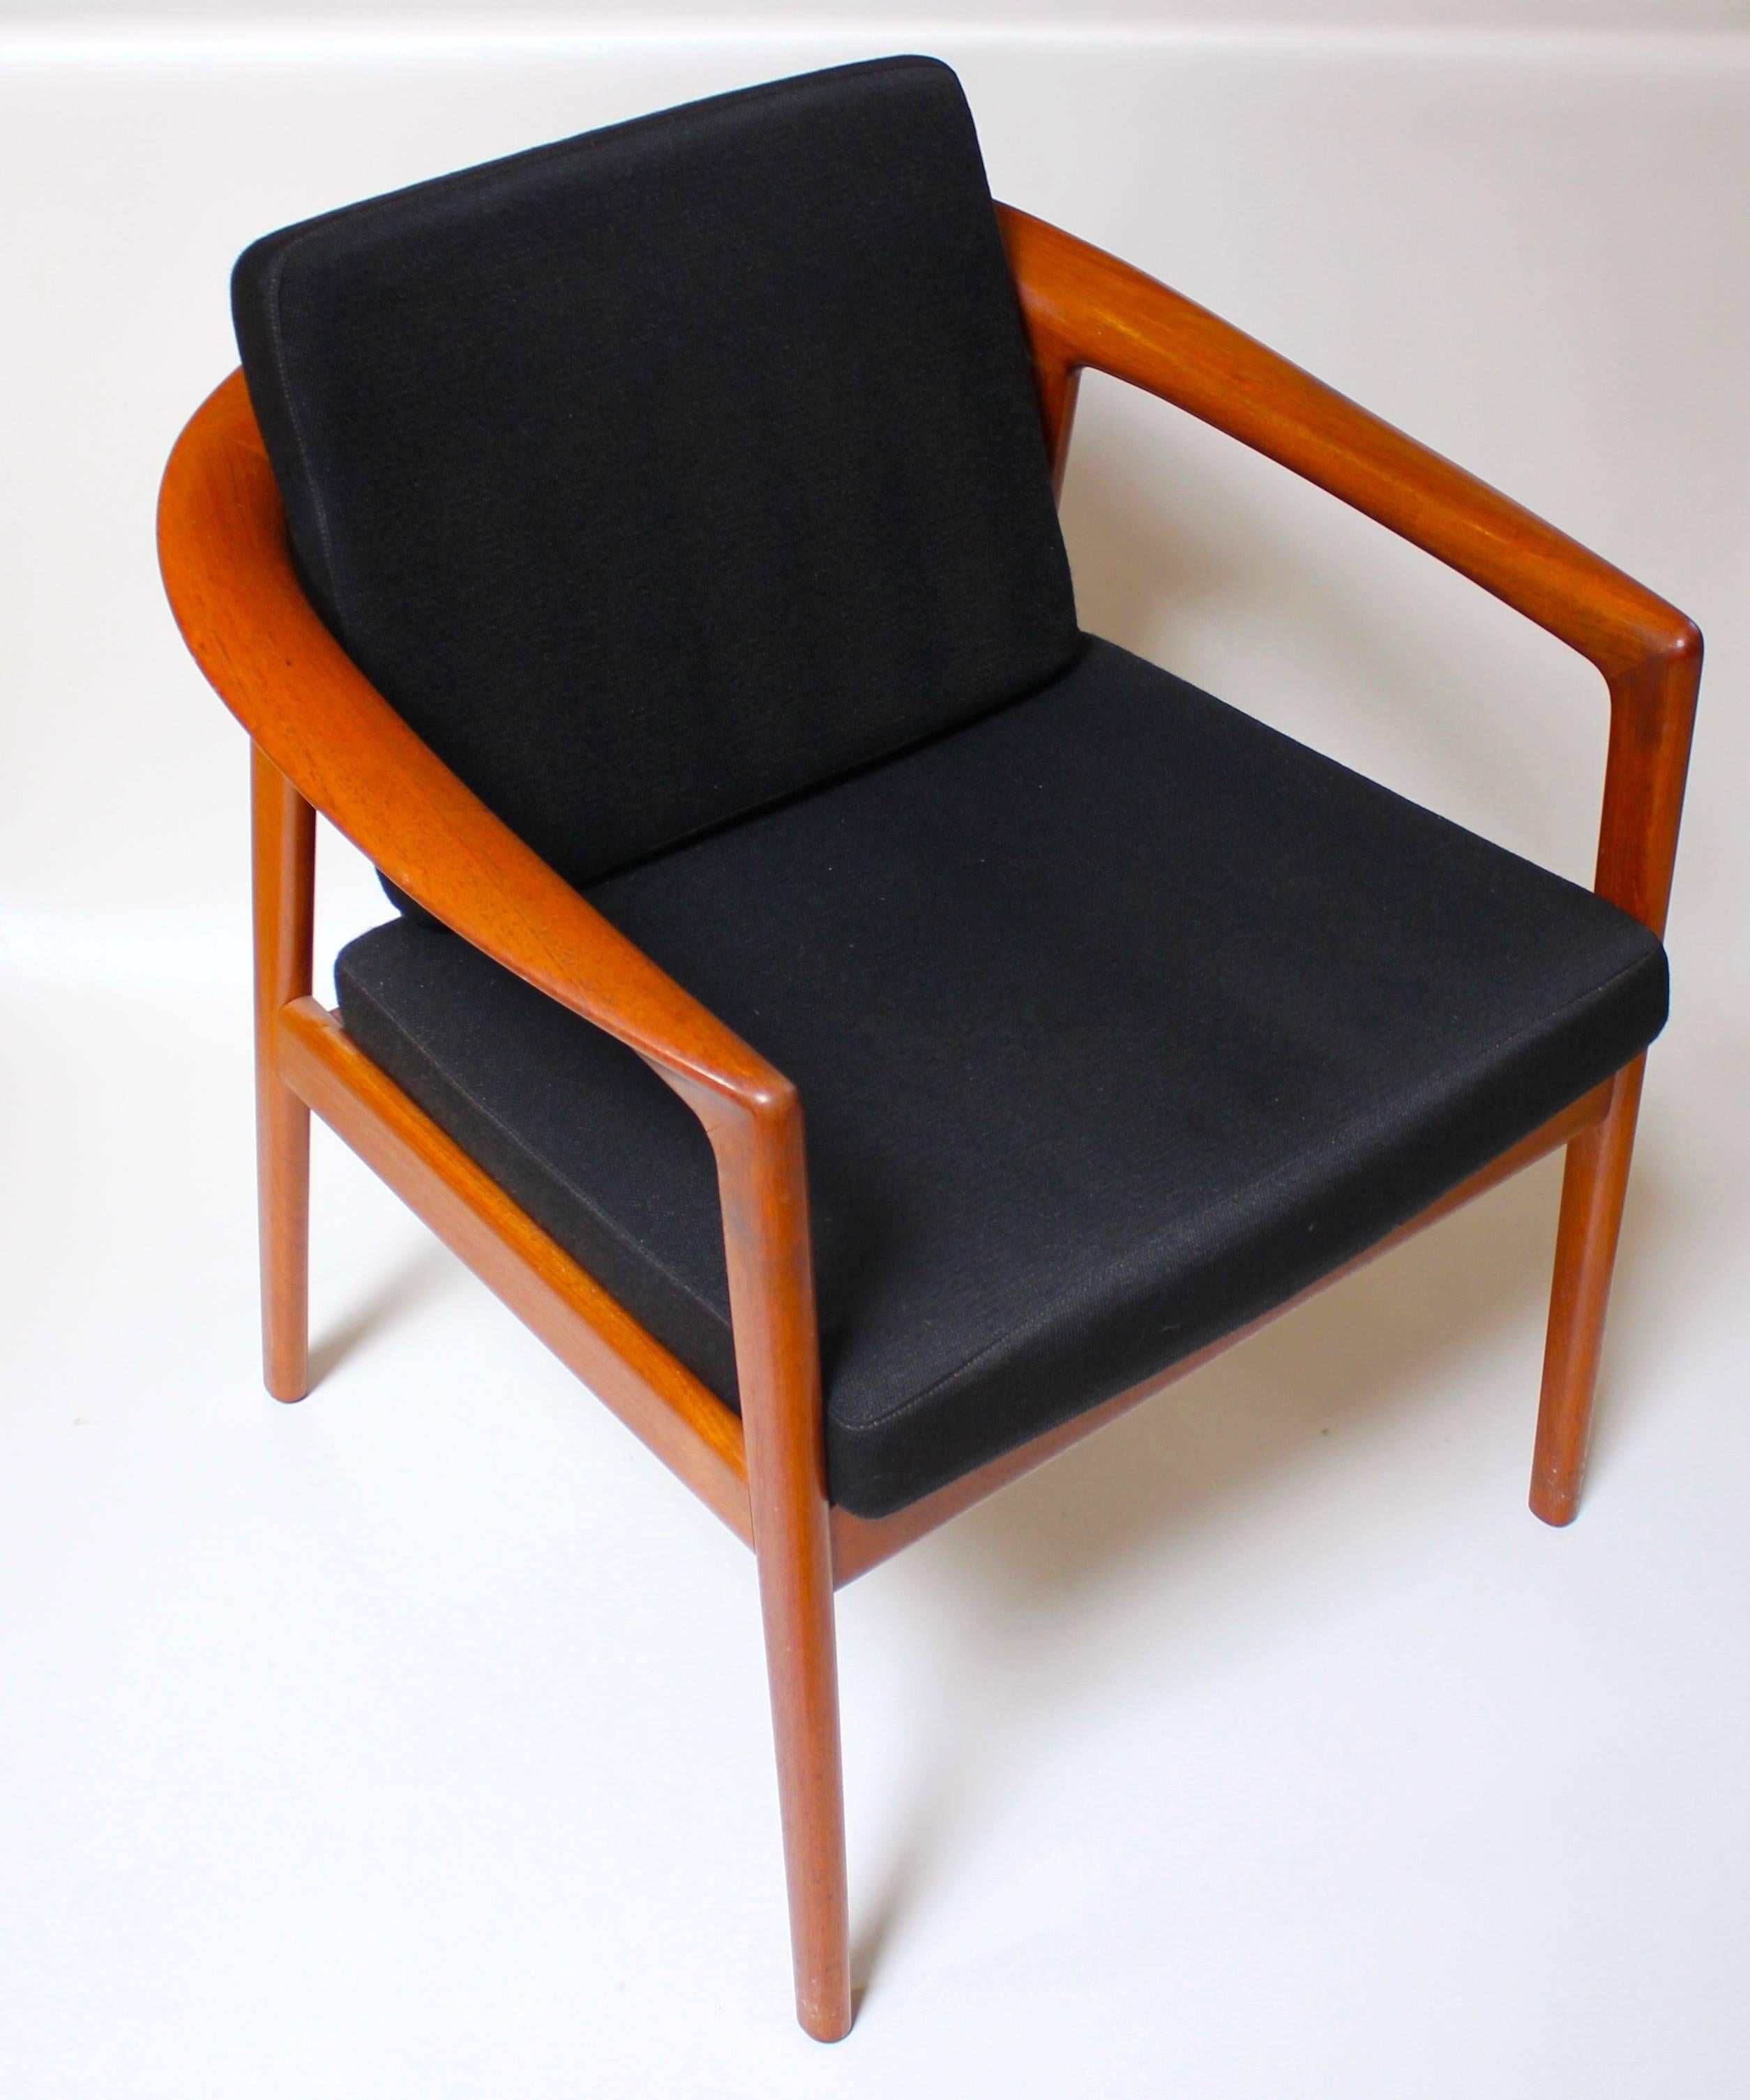 1960s Danish modern lounge chair designed by Folke Ohlsson for DUX. In excellent condition, professionally reupholstered with new foam and fabric.